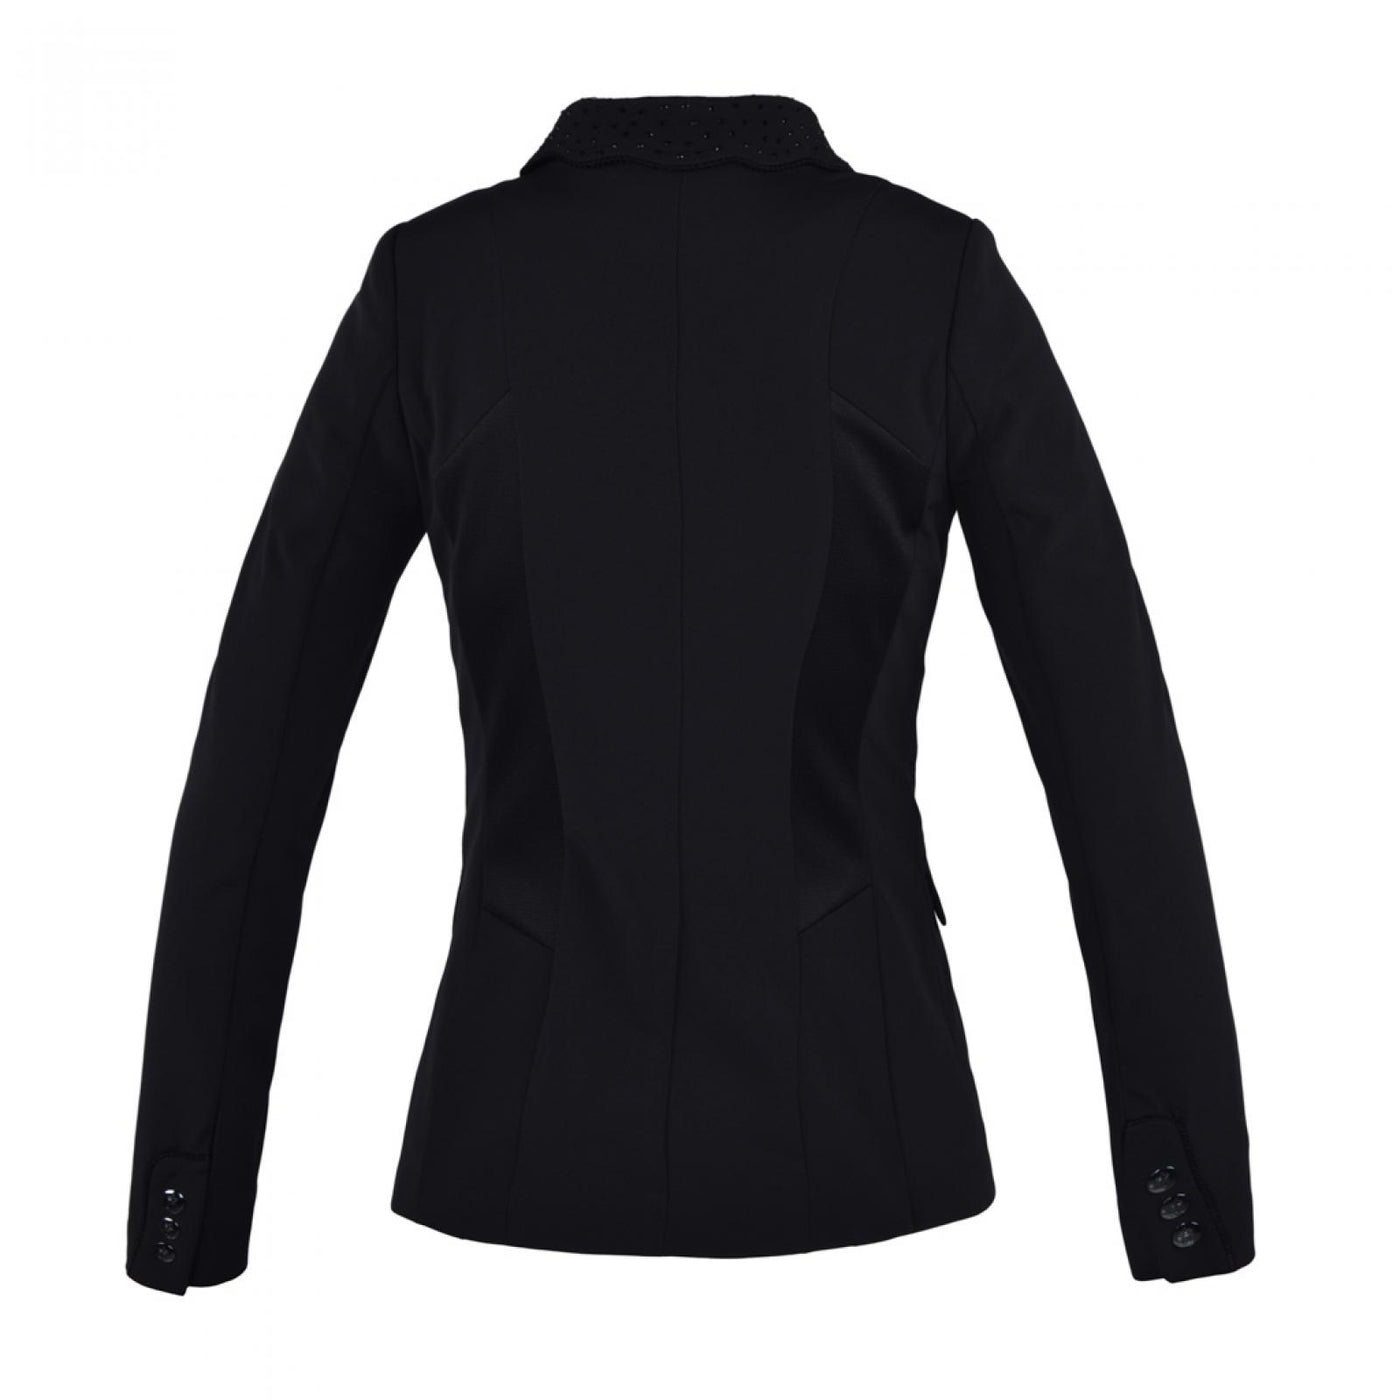 Ossabaw Ladies Show Jacket - OUTLET